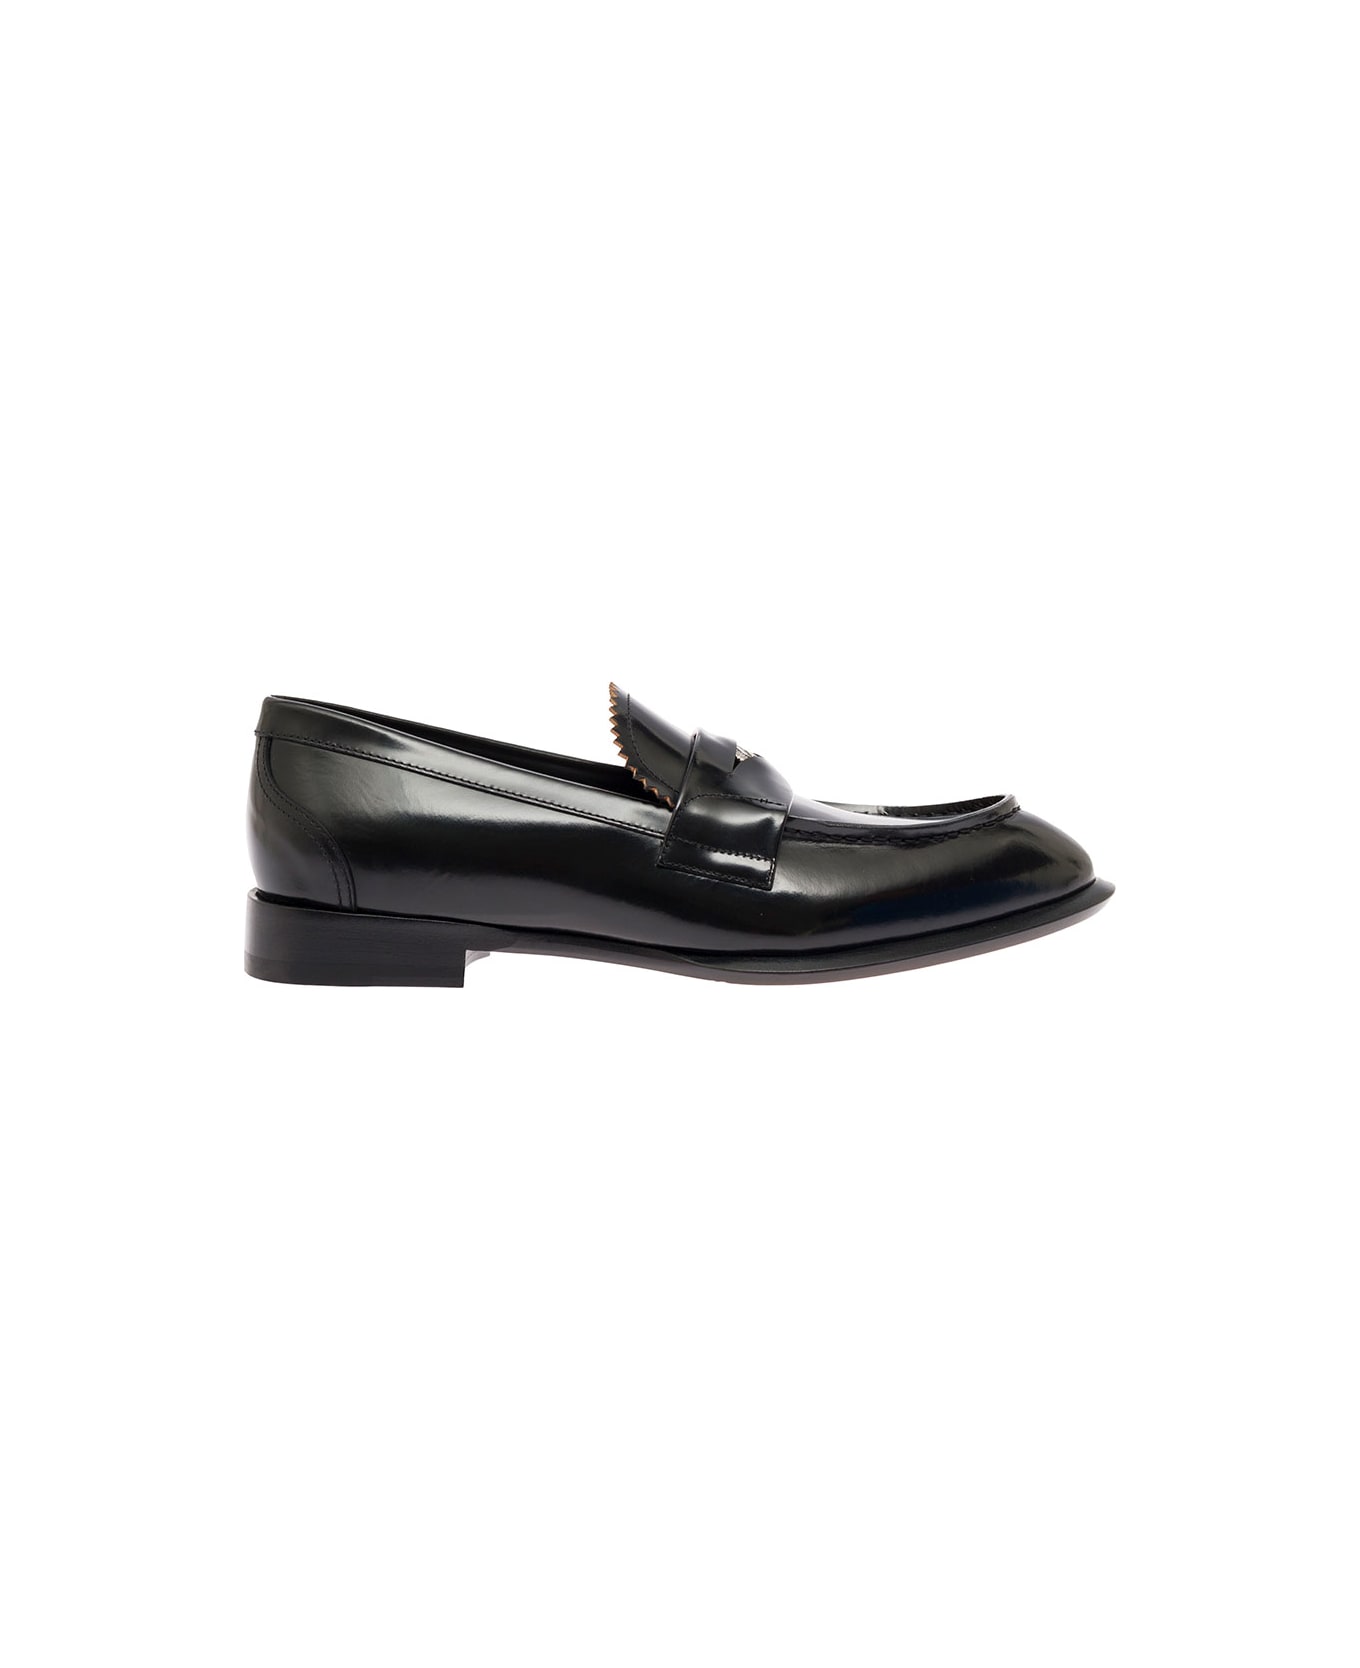 Alexander McQueen Man's Black Leather Loafers With Logo - Black